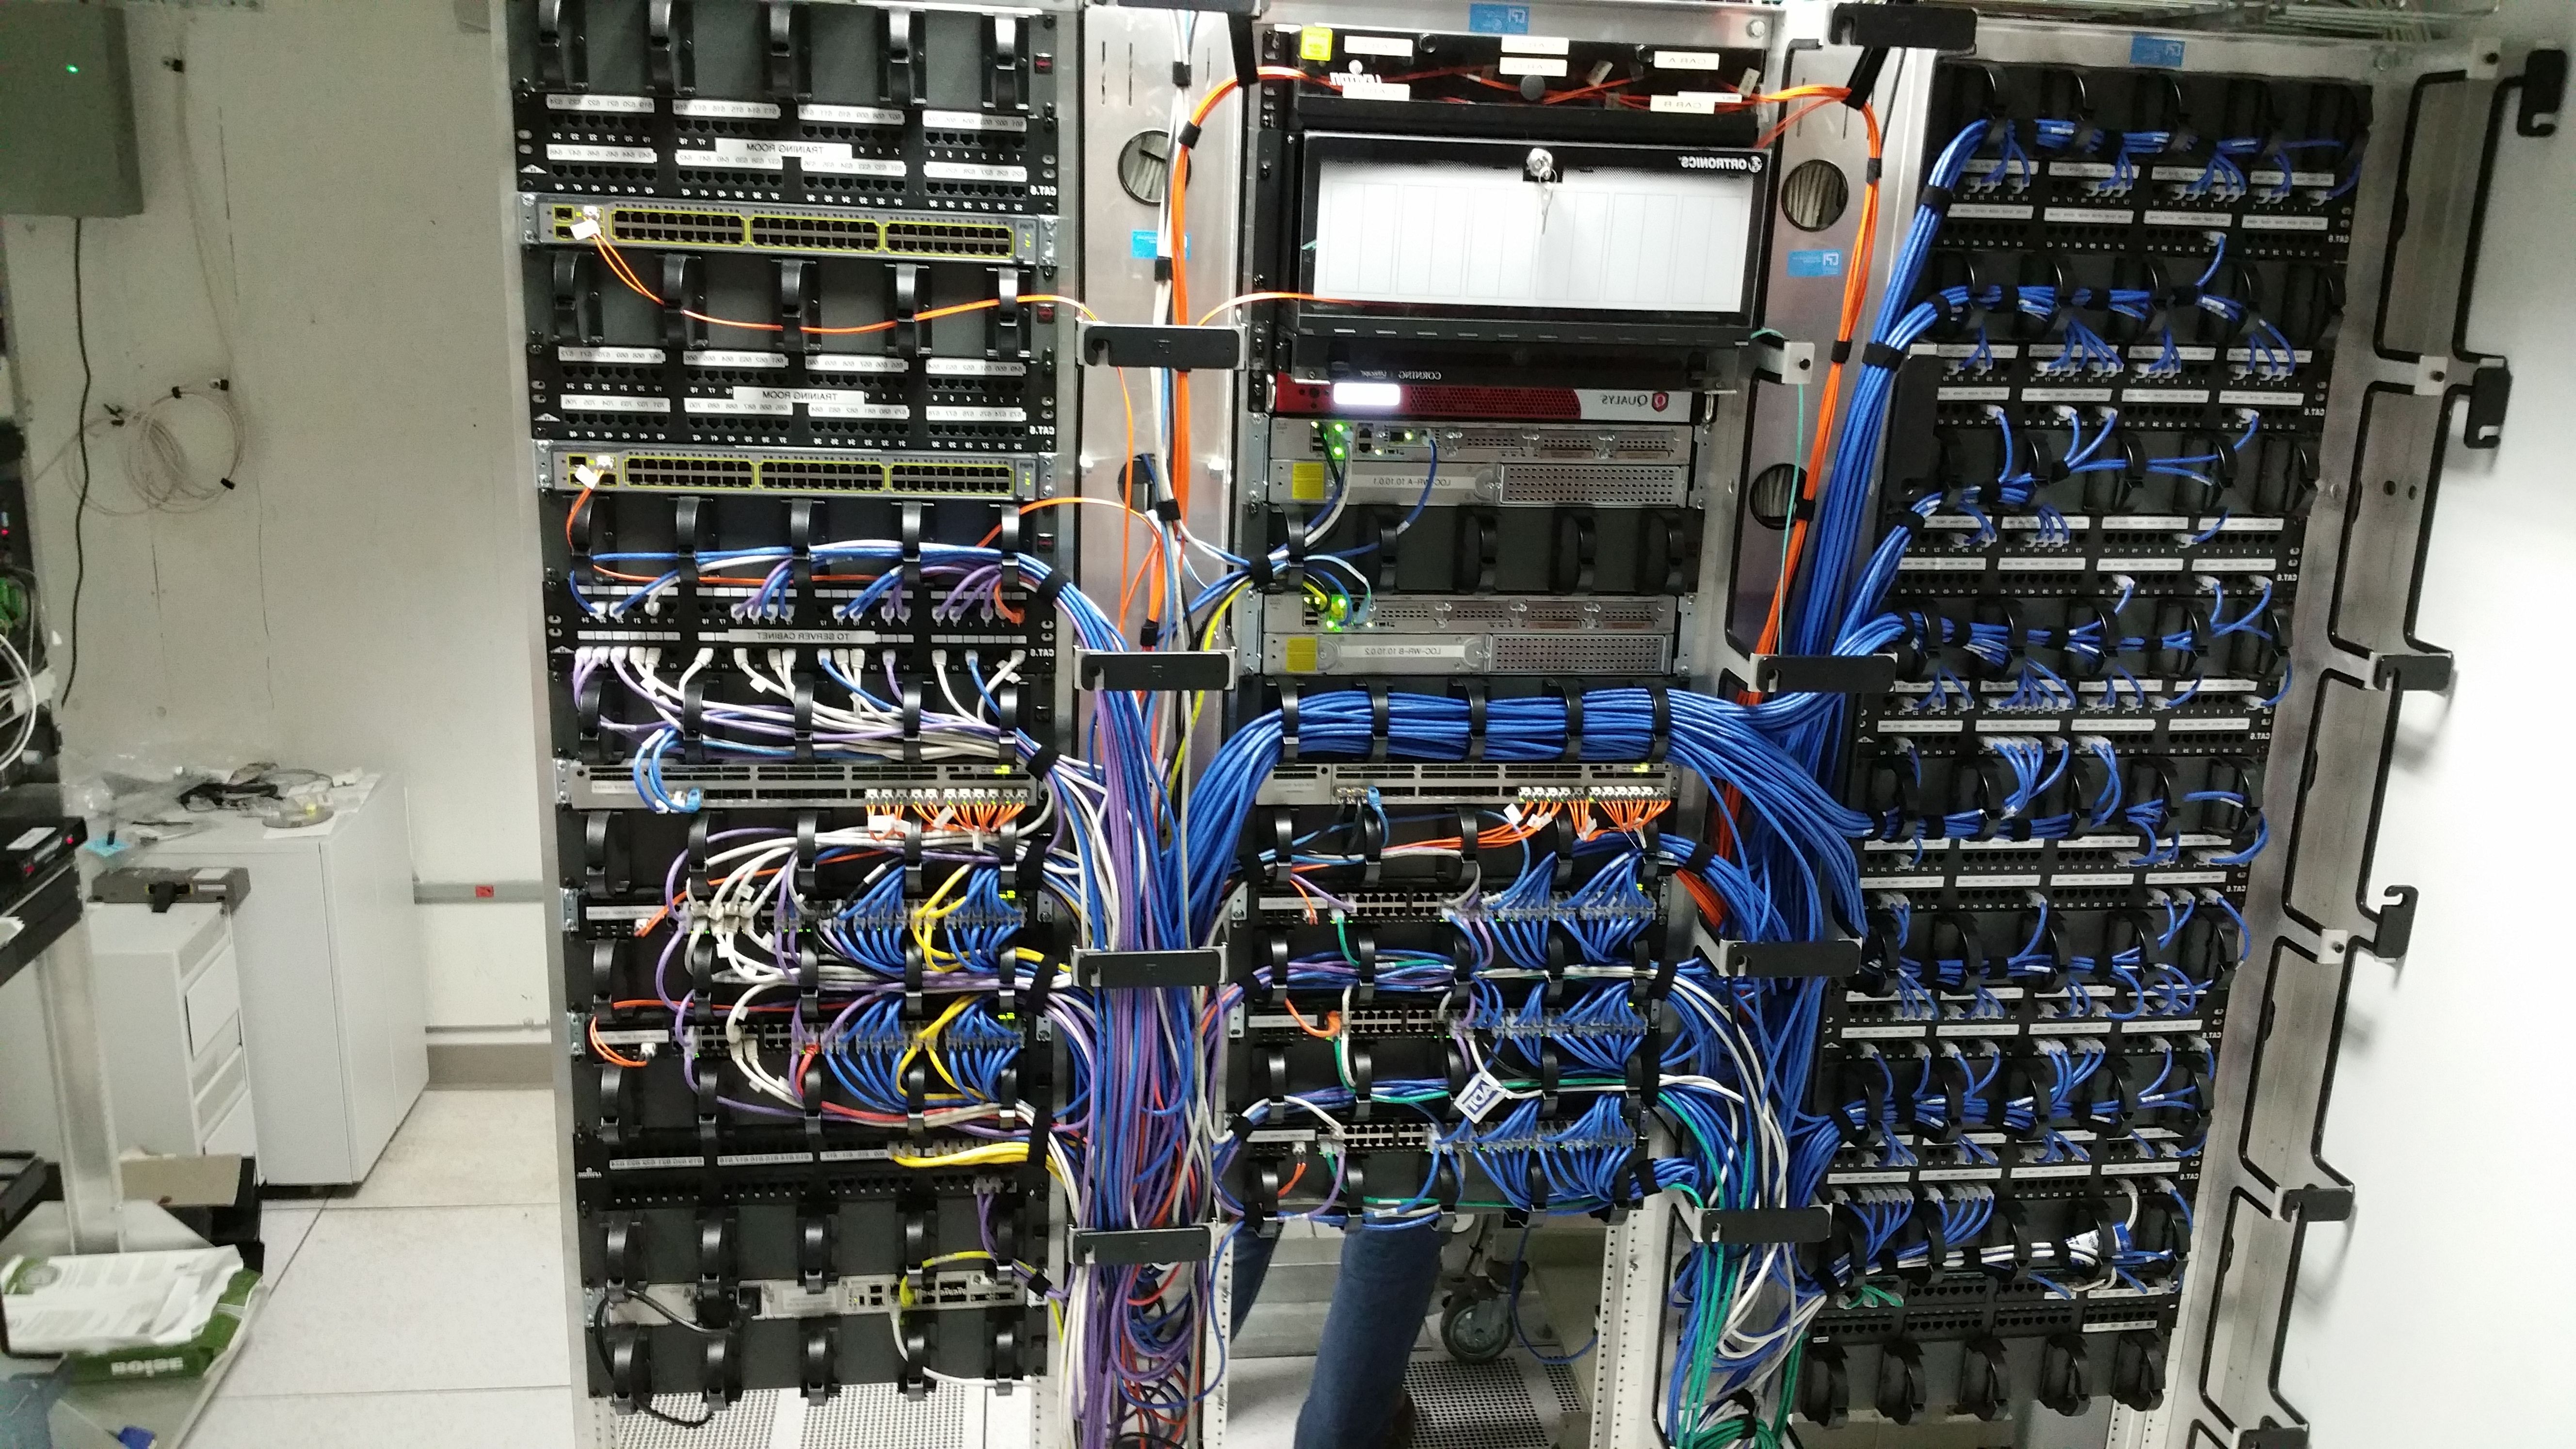 Ovdc Structured Cabling Project In Cleveland | Ohio Voice With Cleveland Server (Gallery 1 of 20)